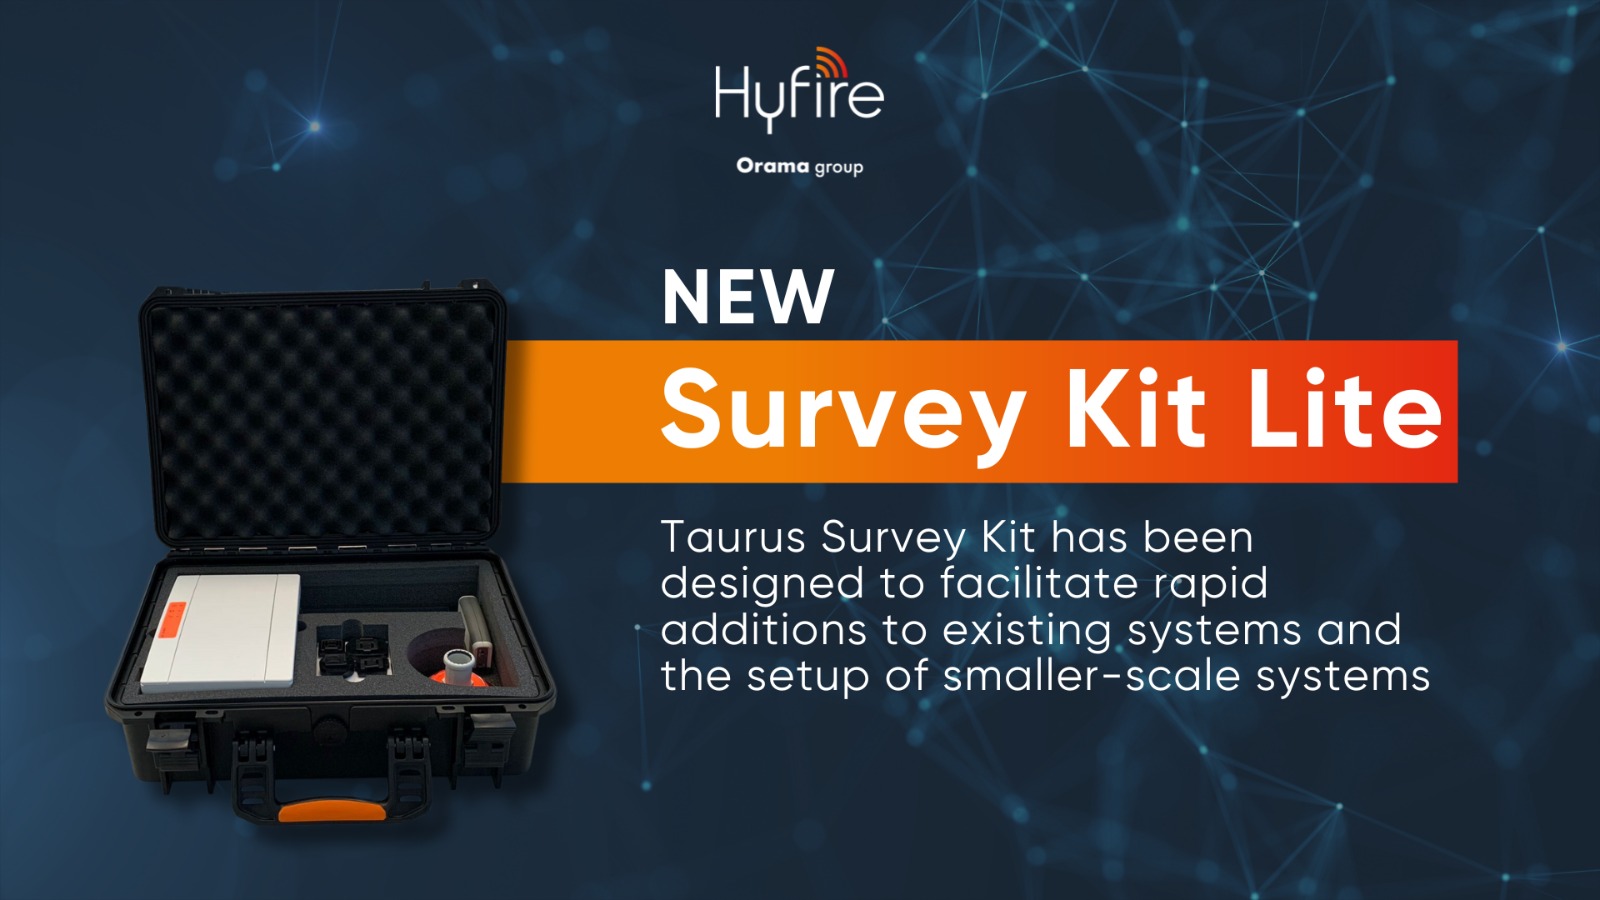 Hyfire Launches the ‘Taurus Survey Kit Lite’: The Go-to Tool for Smaller Fire Systems